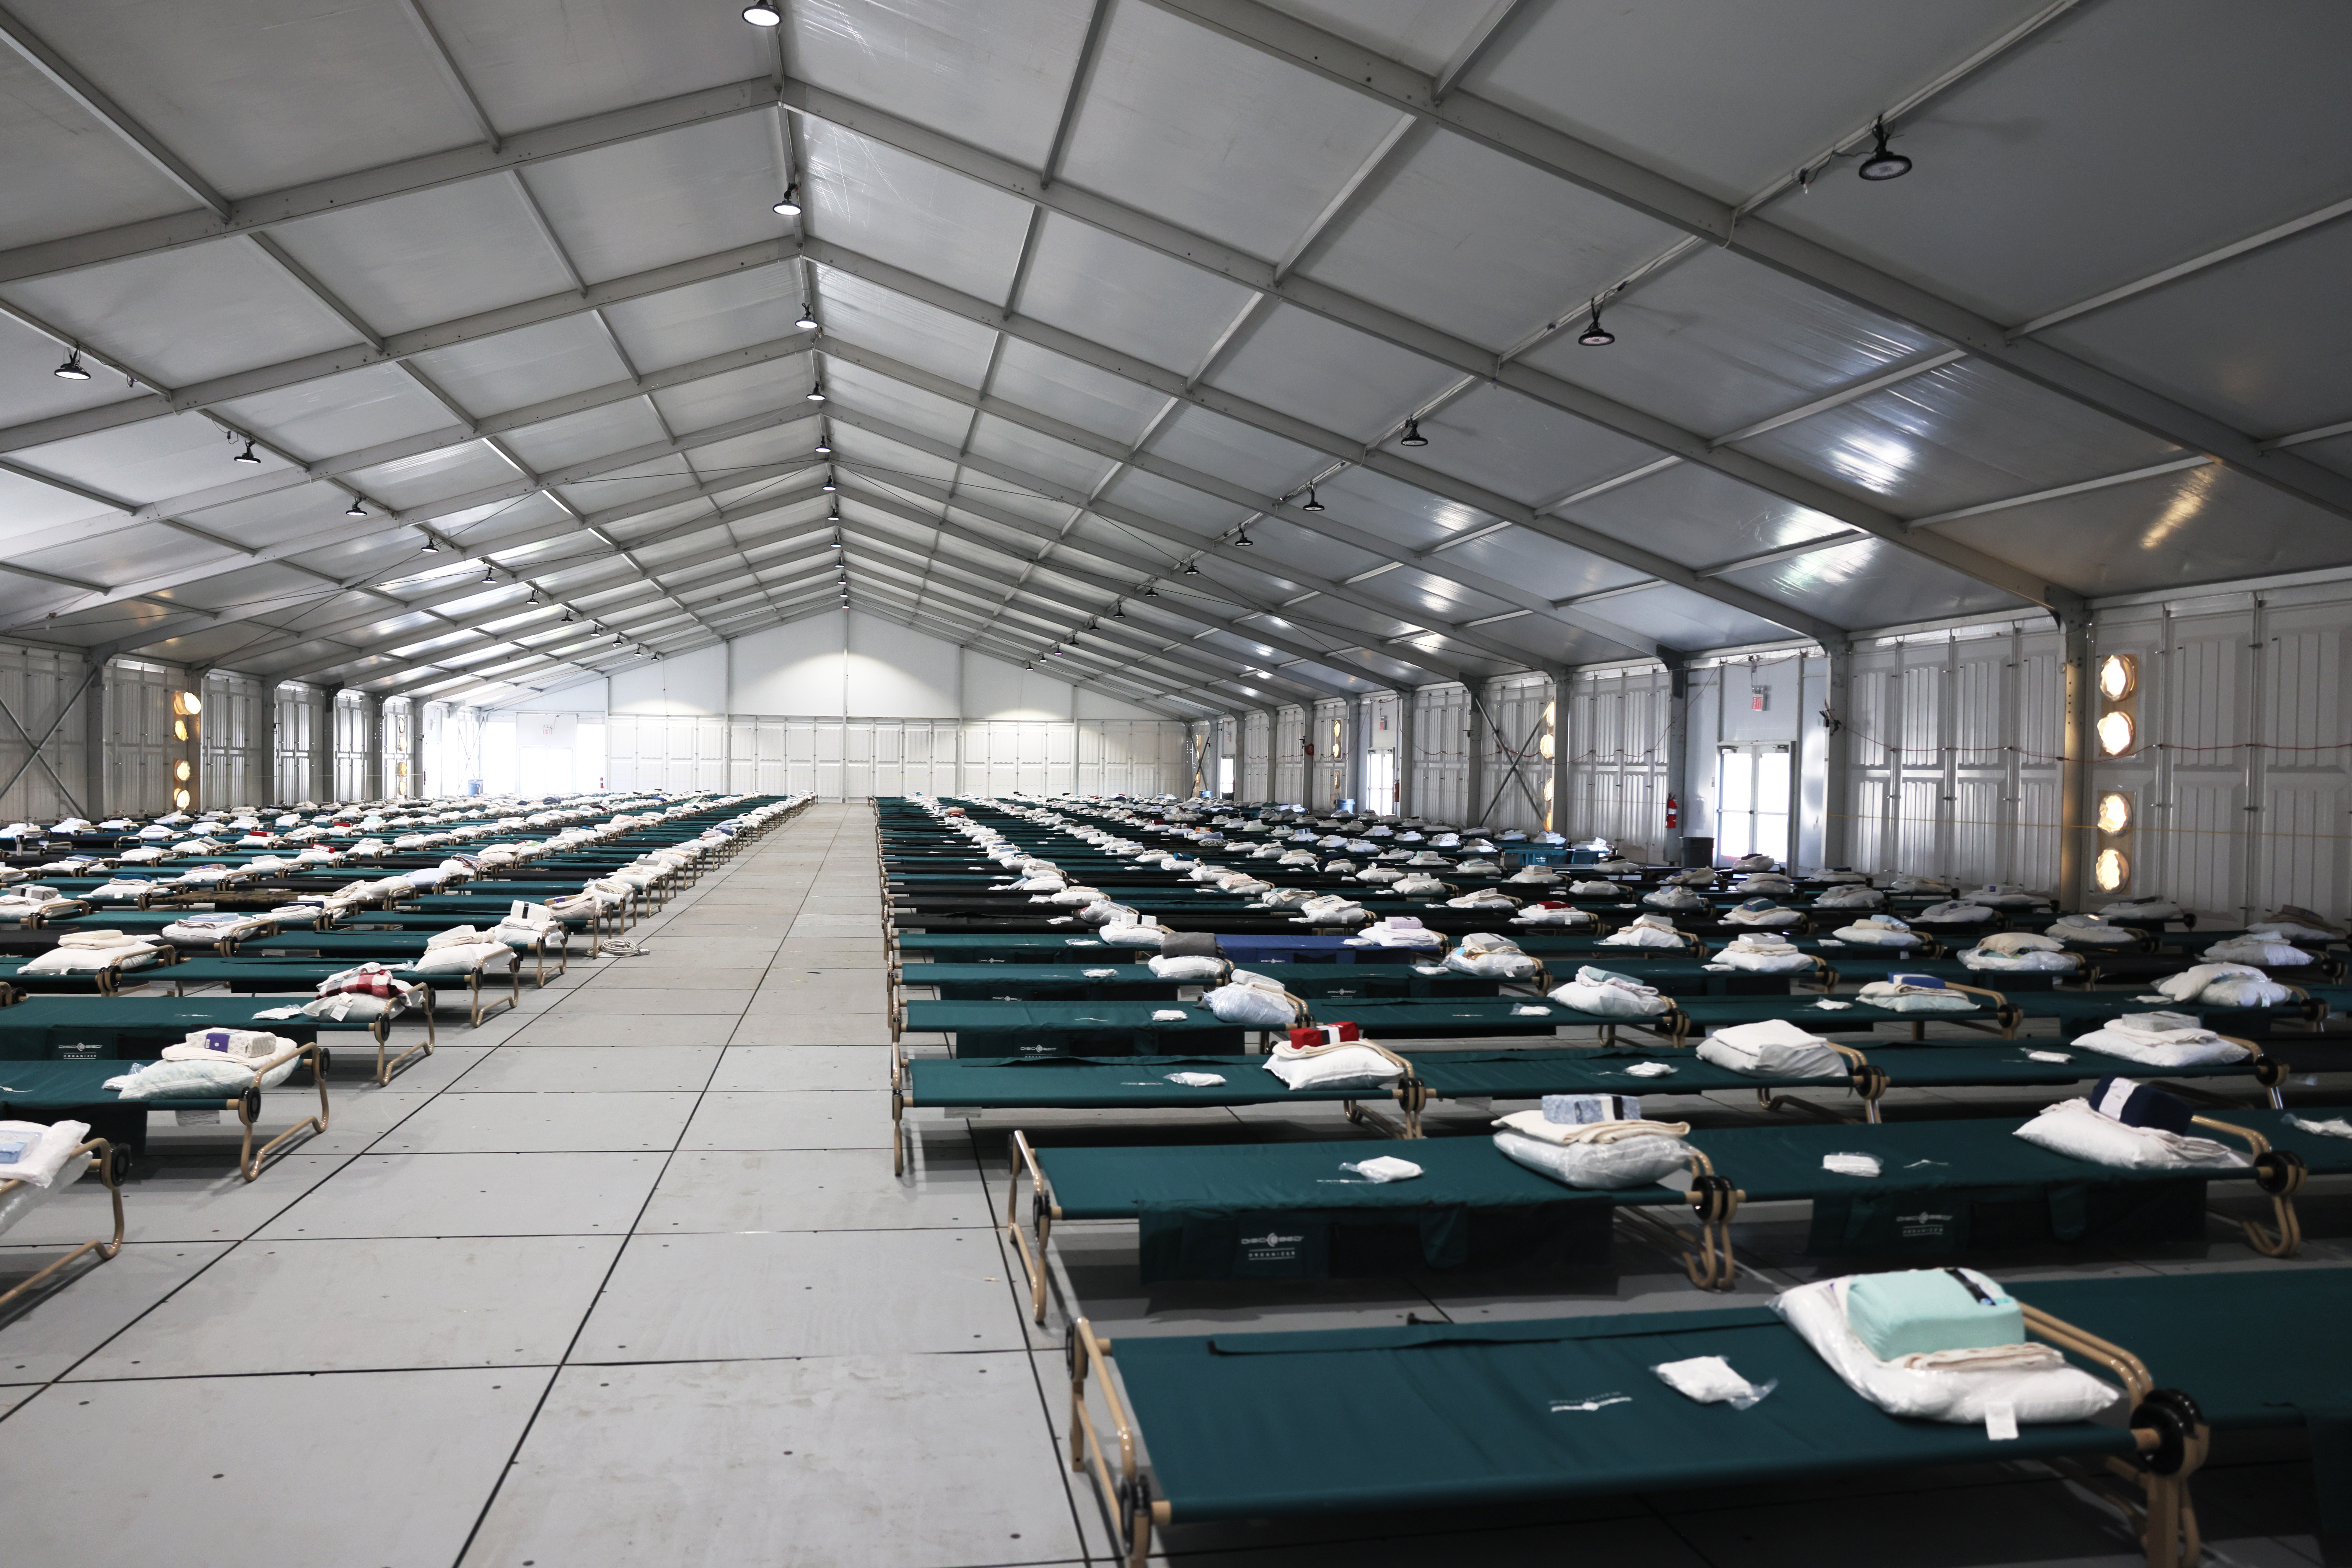 NEW YORK, NEW YORK - OCTOBER 18: Beds are seen in the dormitory during a tour of the Randall's Island Humanitarian Emergency Response and Relief Center on October 18, 2022 in New York City. Photo by Michael M. Santiago/Getty Images